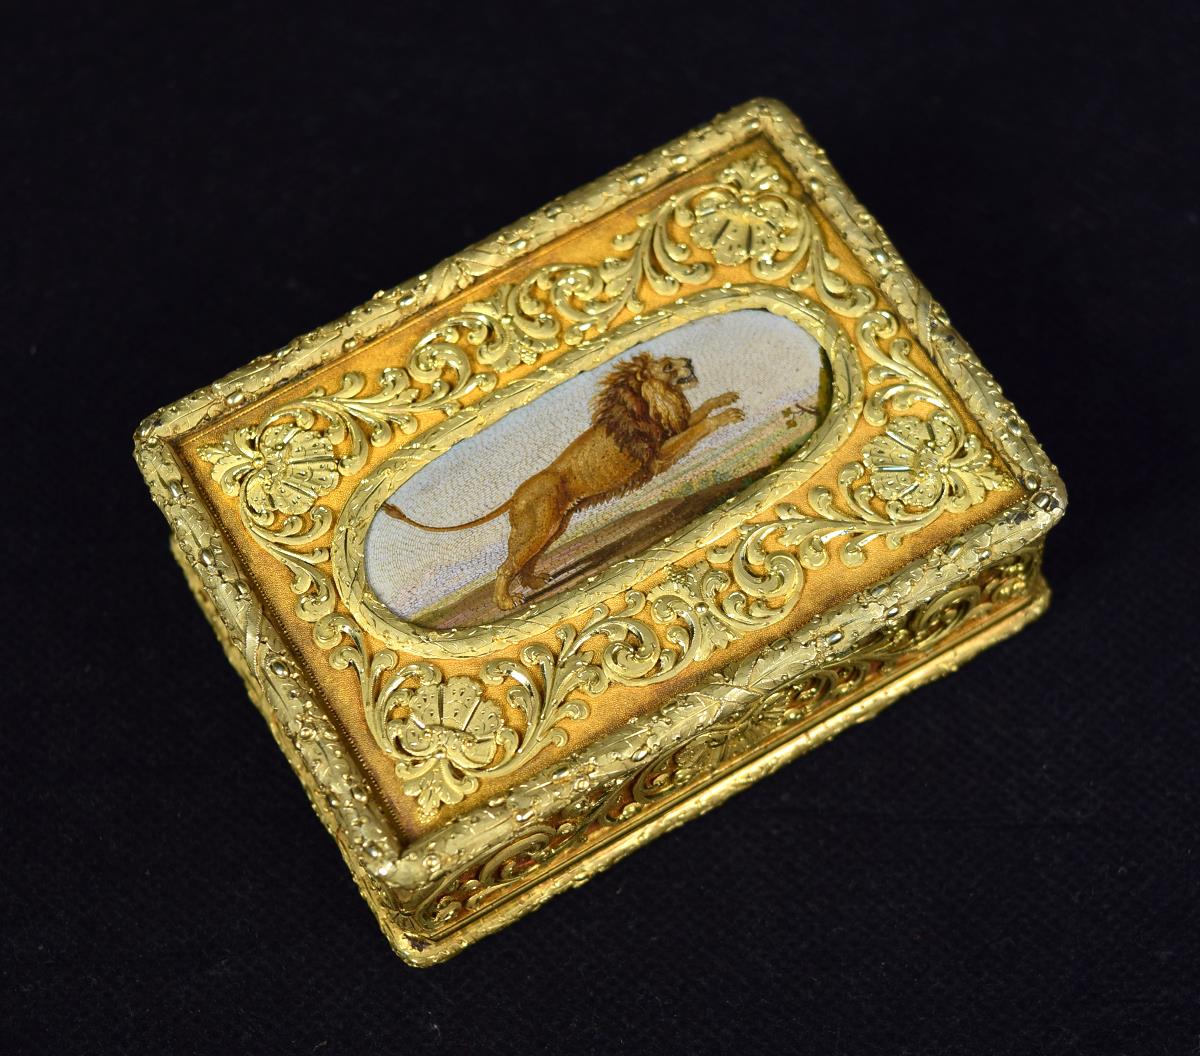 An 18ct gold cage work decorated snuff box, by Alexander J Strachan, London 1808, the cover inset - Image 2 of 9